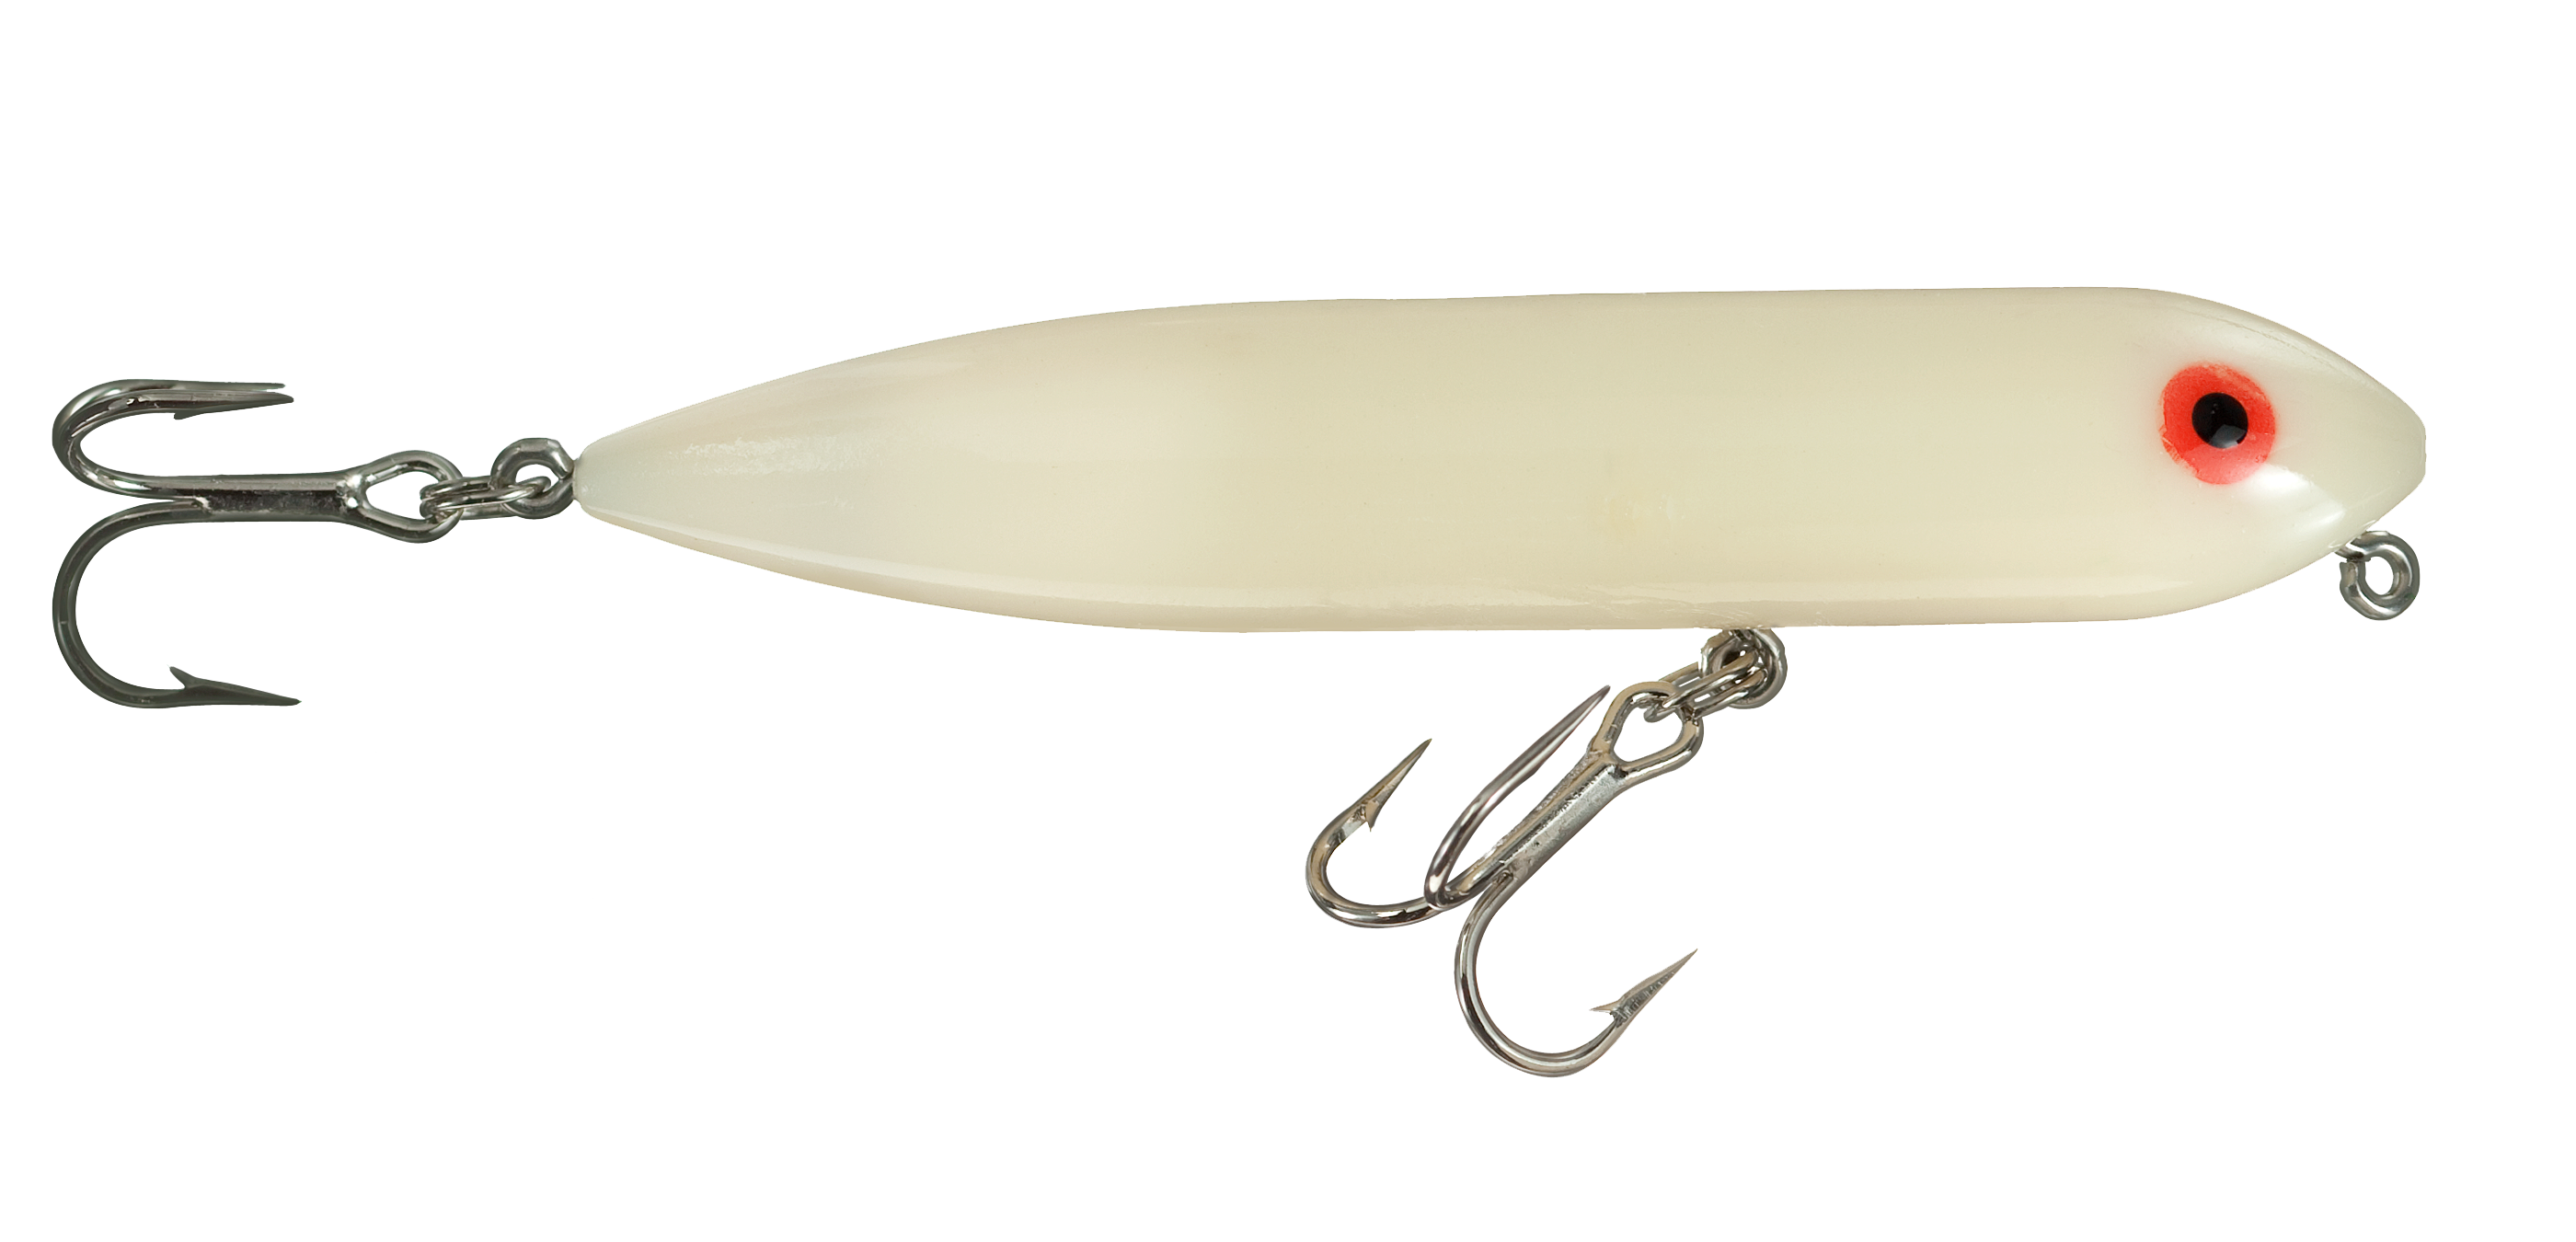 Heddon Zara Puppy Lures - All colors available